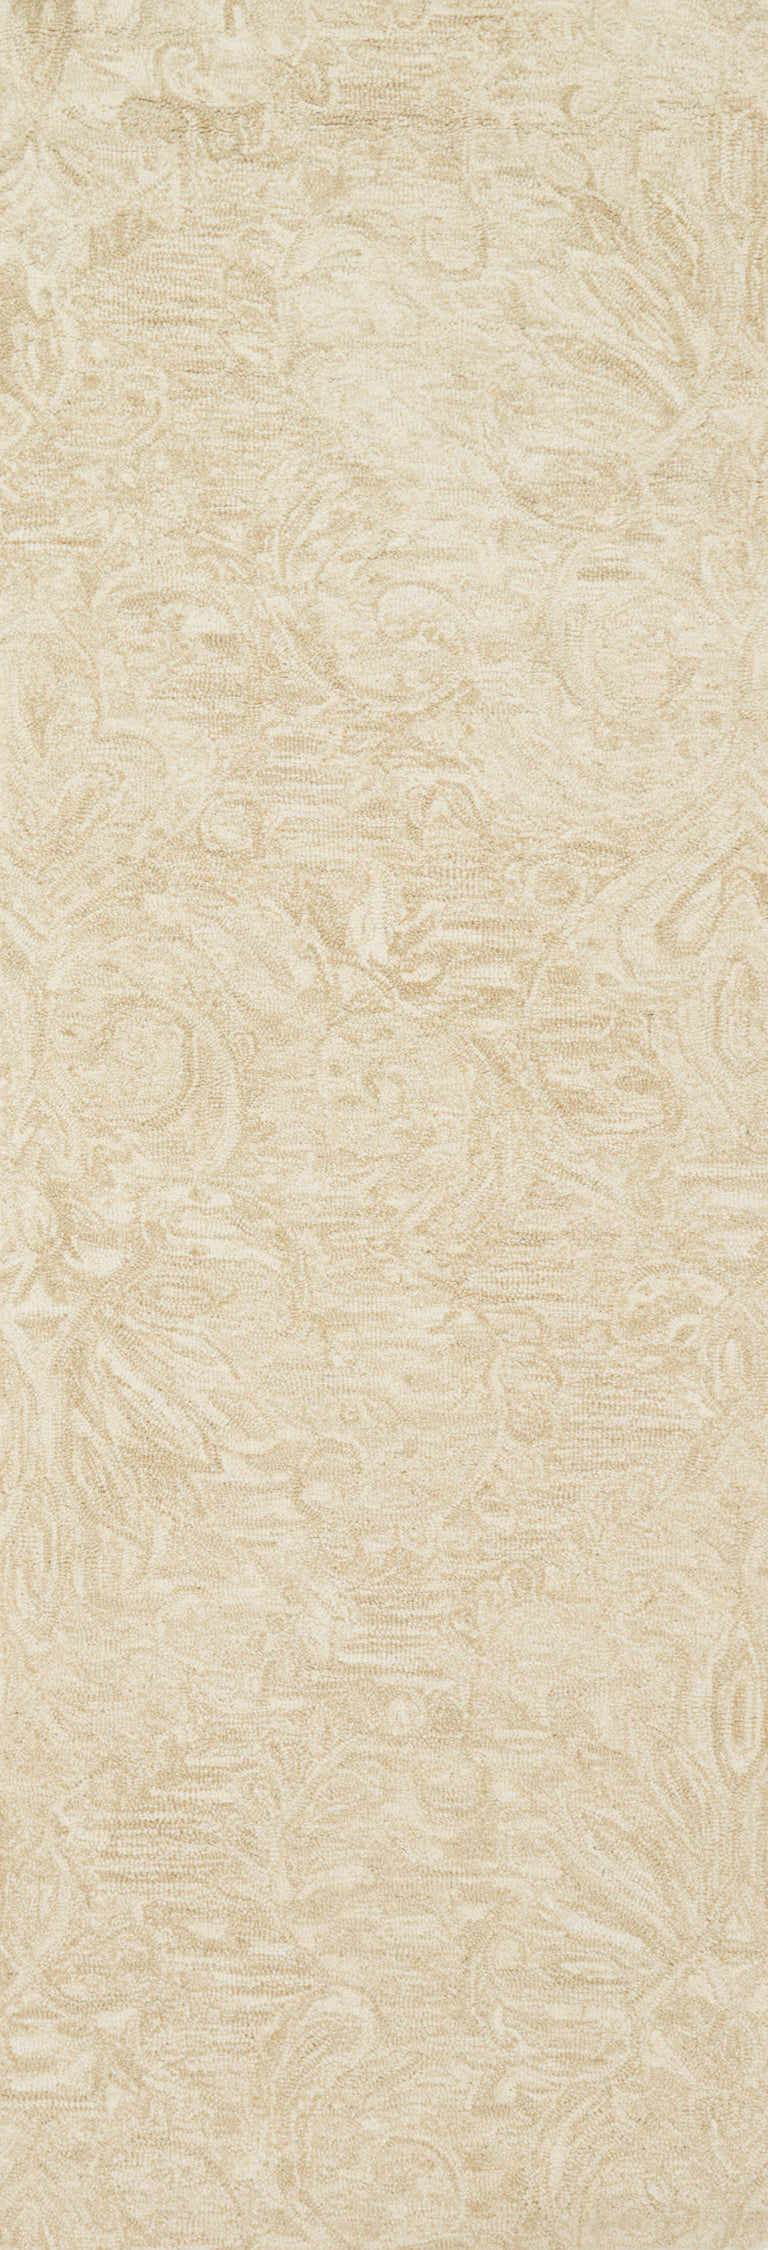 Loloi Rugs Lyle Collection Rug in Sand - 9'3" x 13'